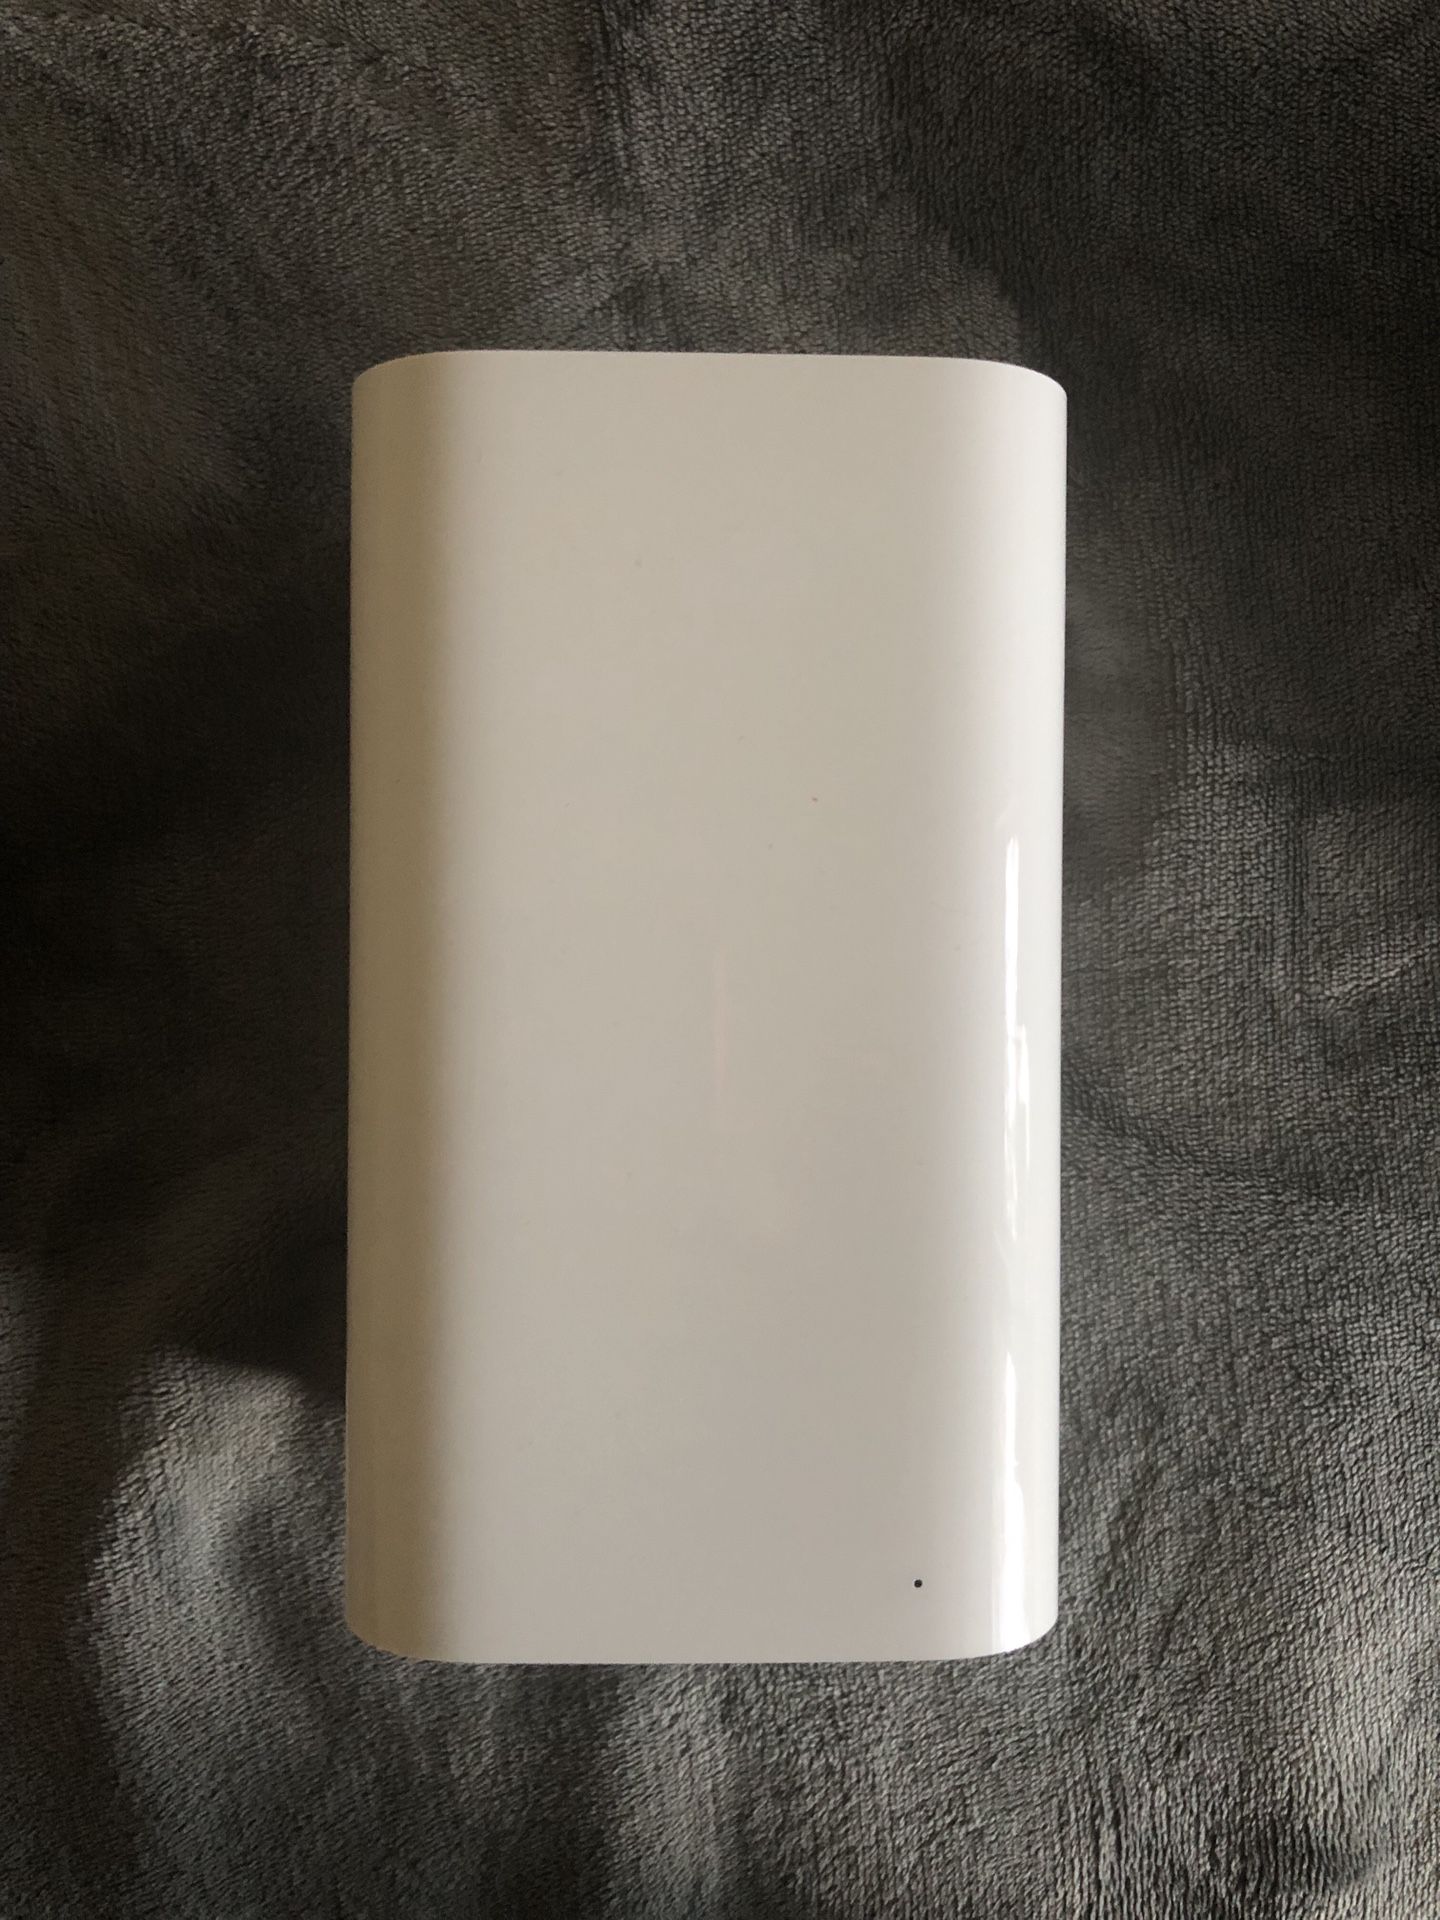 WiFi Router || Apple AirPort Extreme (gen 6)